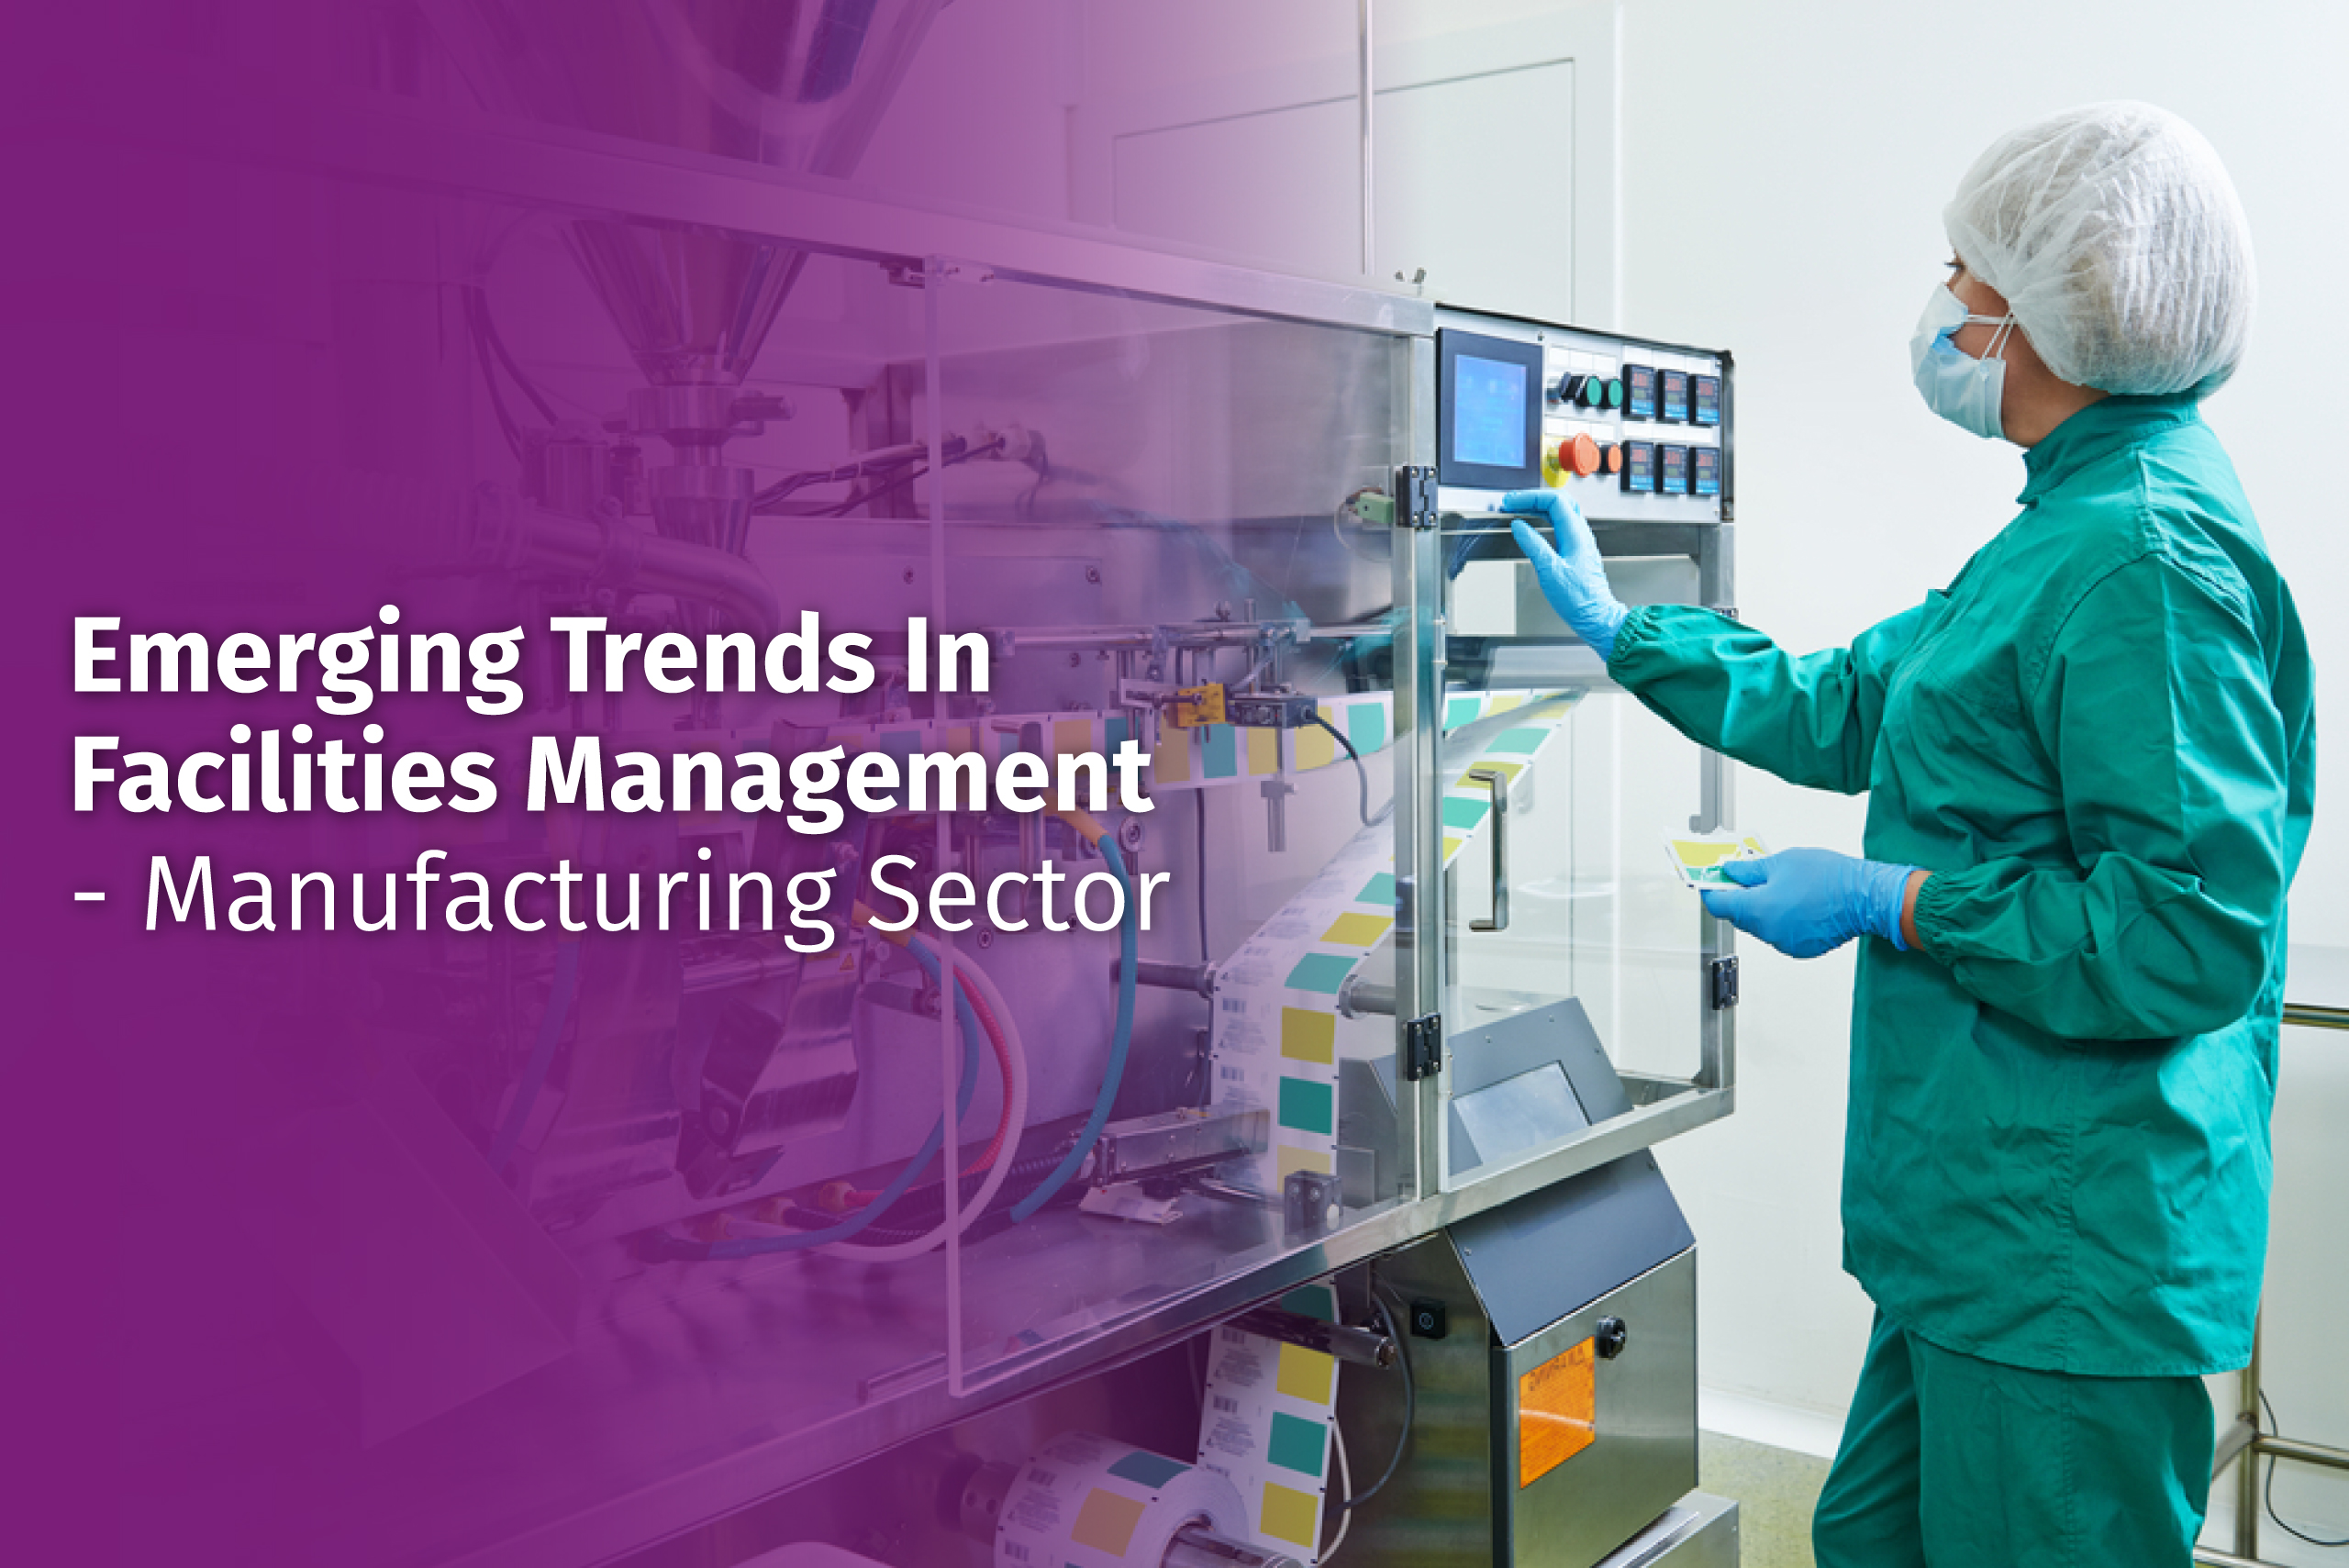 Emerging-Trends-In-Facilities-Management for Manufacturing-Sector